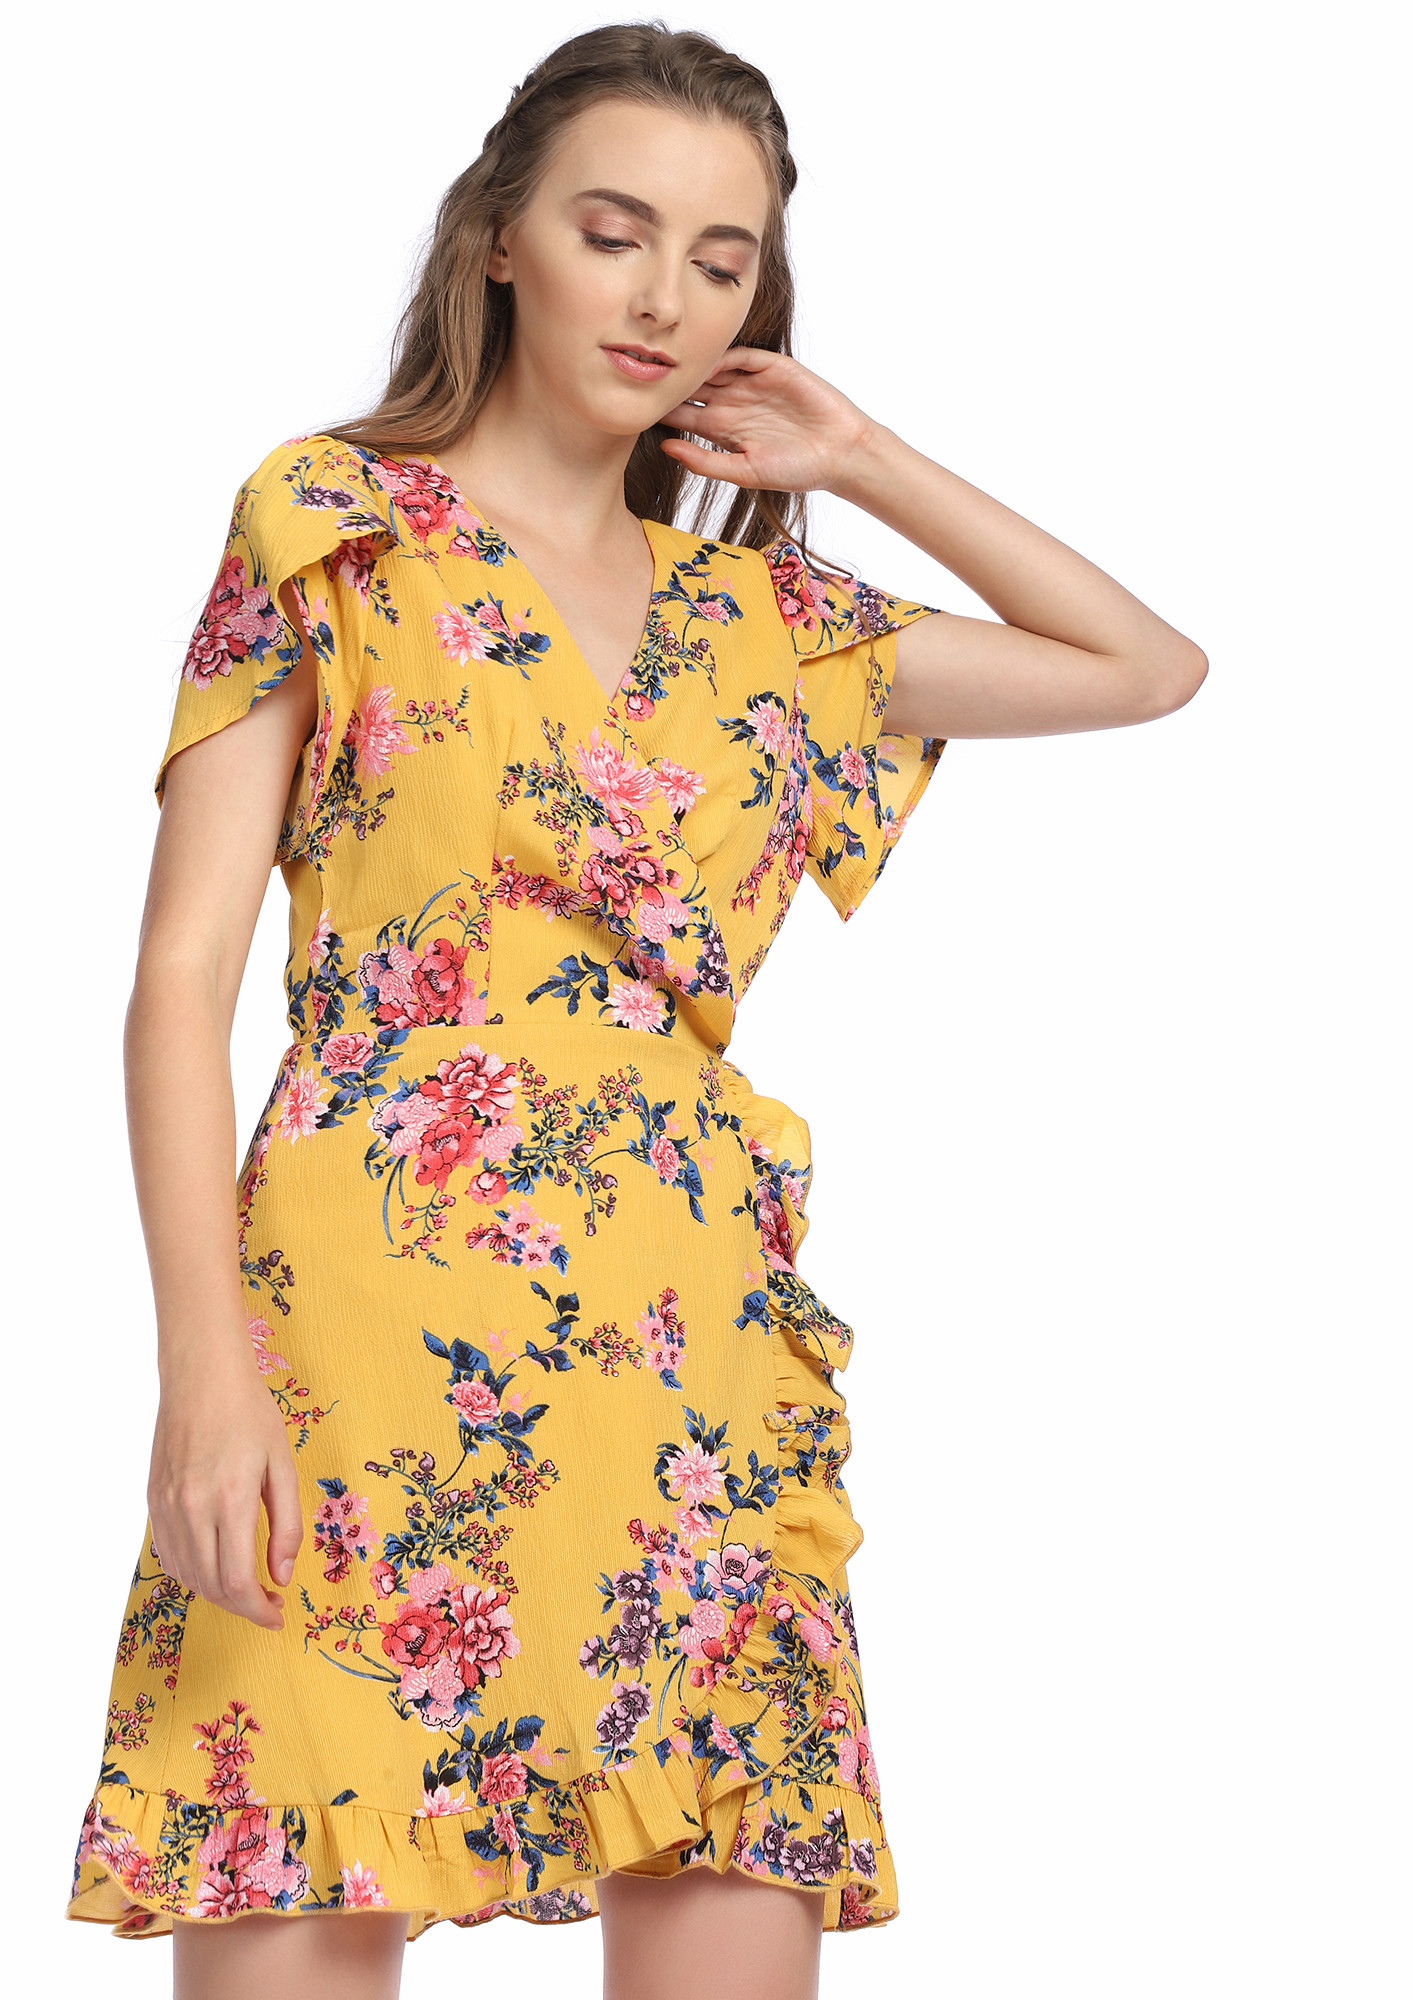 FLORALS ON MY MIND YELLOW SKATER DRESS